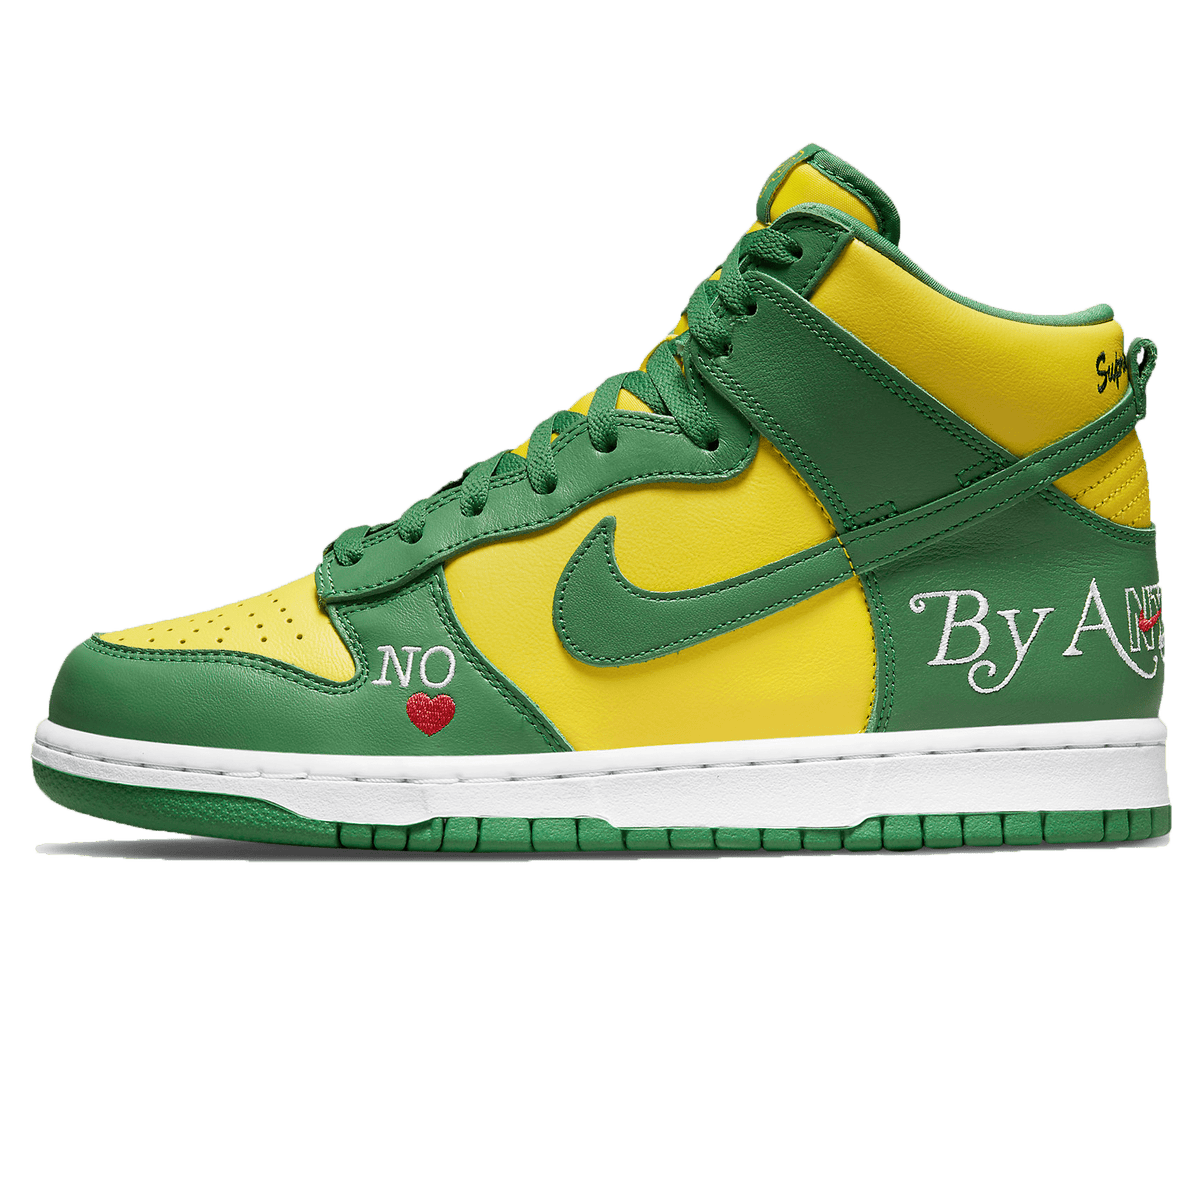 Supreme x Nike Dunk High SB By Any Means   Brazil